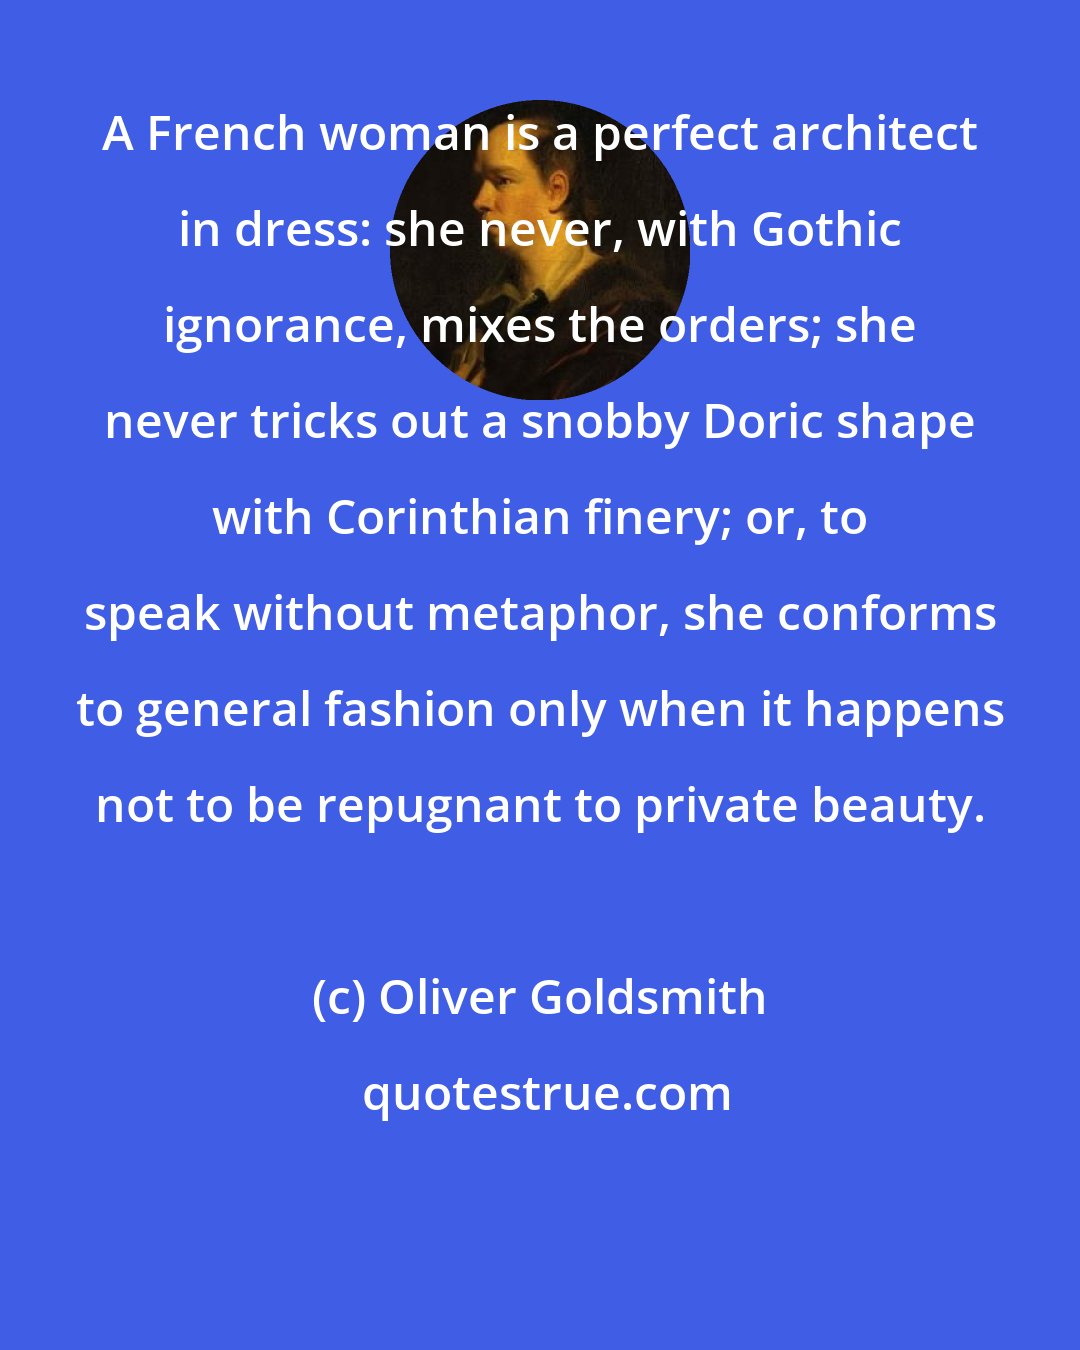 Oliver Goldsmith: A French woman is a perfect architect in dress: she never, with Gothic ignorance, mixes the orders; she never tricks out a snobby Doric shape with Corinthian finery; or, to speak without metaphor, she conforms to general fashion only when it happens not to be repugnant to private beauty.